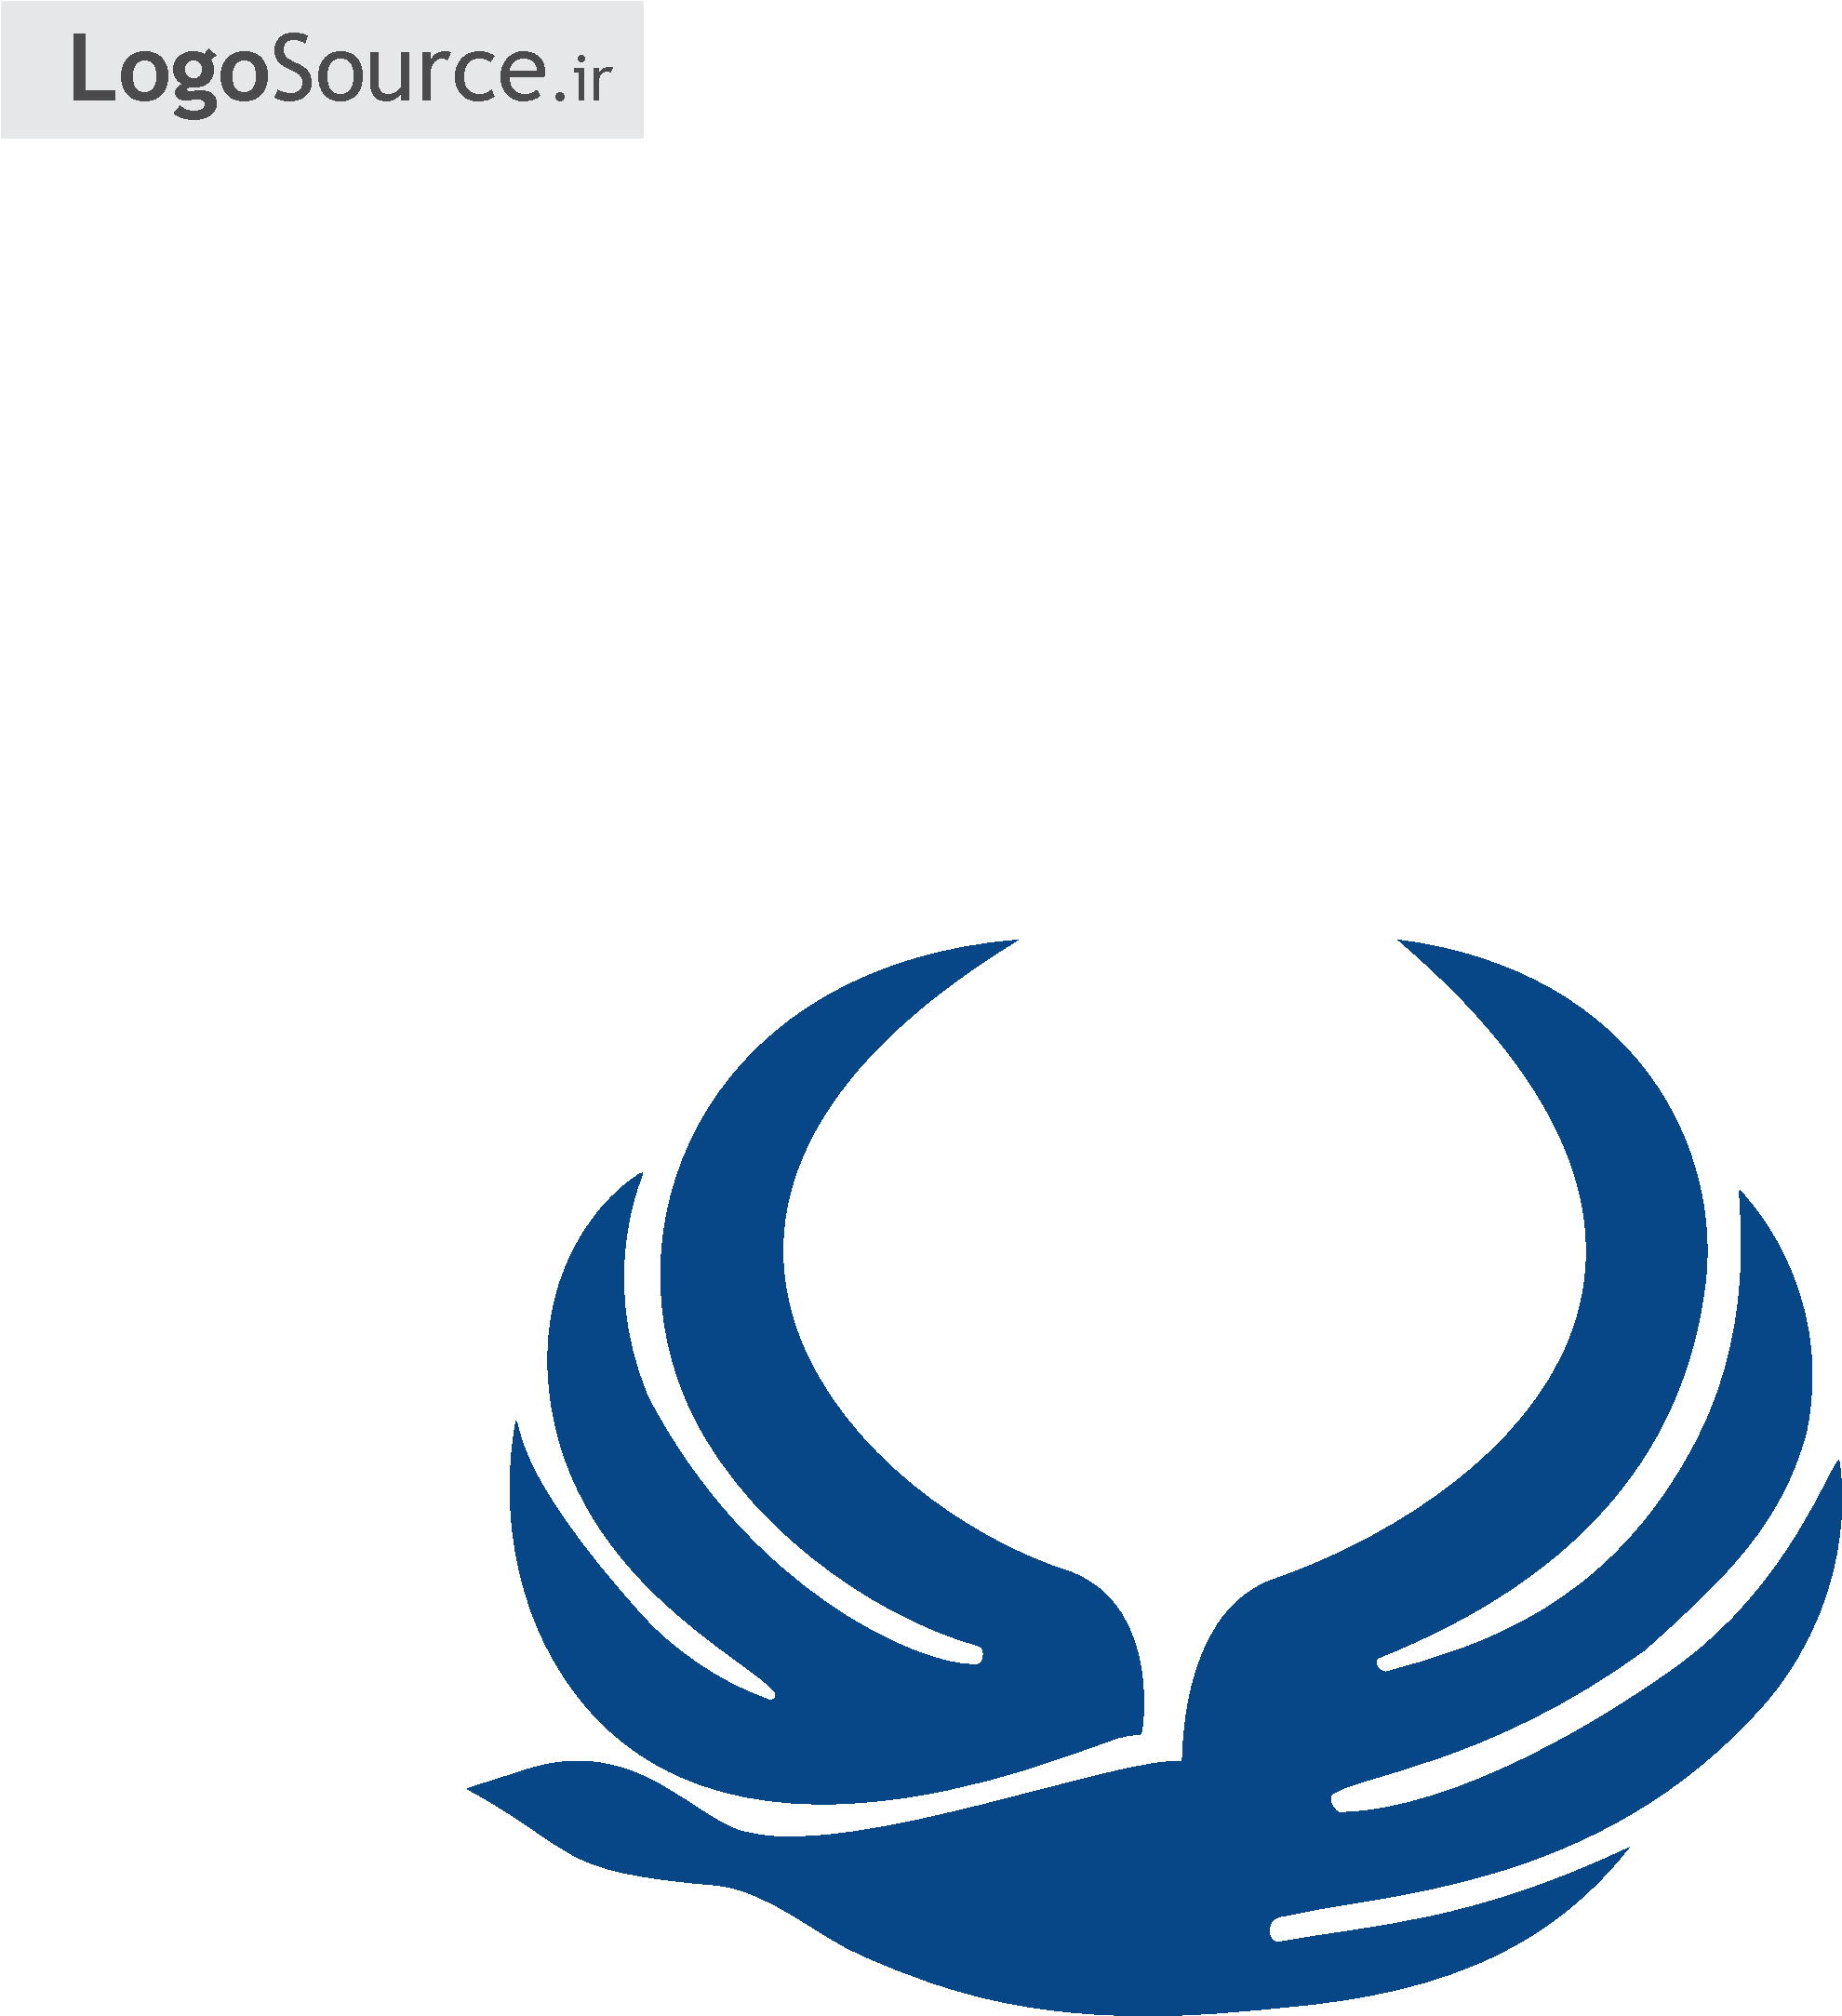 File Png - Iran Aseman Airlines (2480x3507)